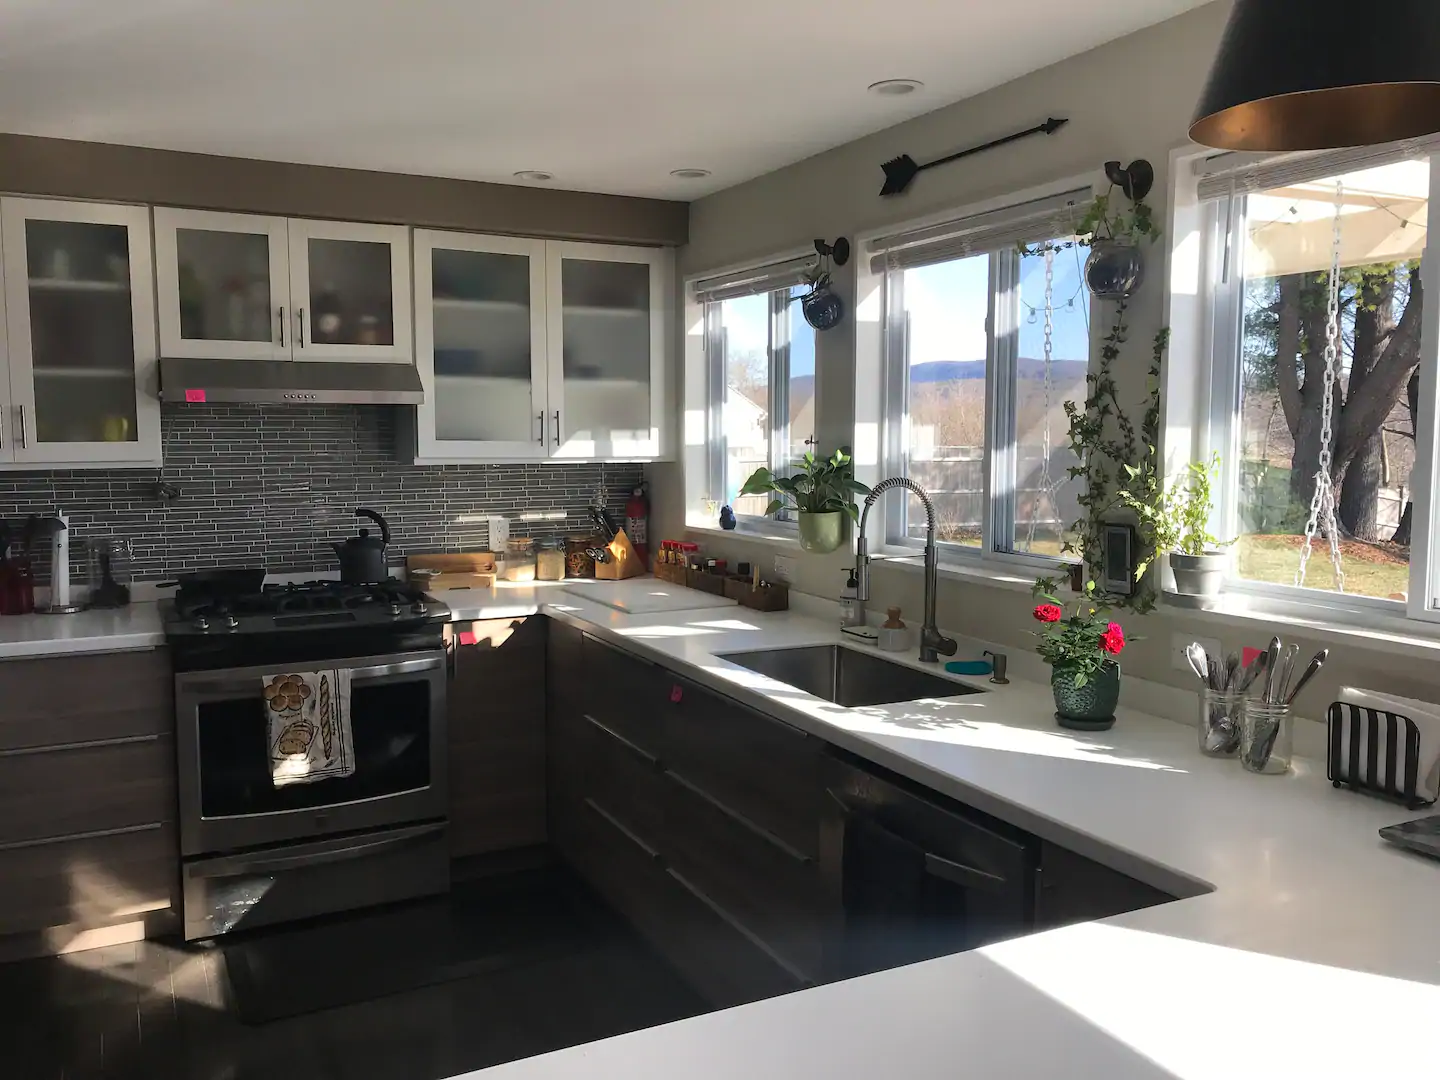 Interior view of a kitchen with white tops and cabinetry. Light is coming in through the windows next to the sink.